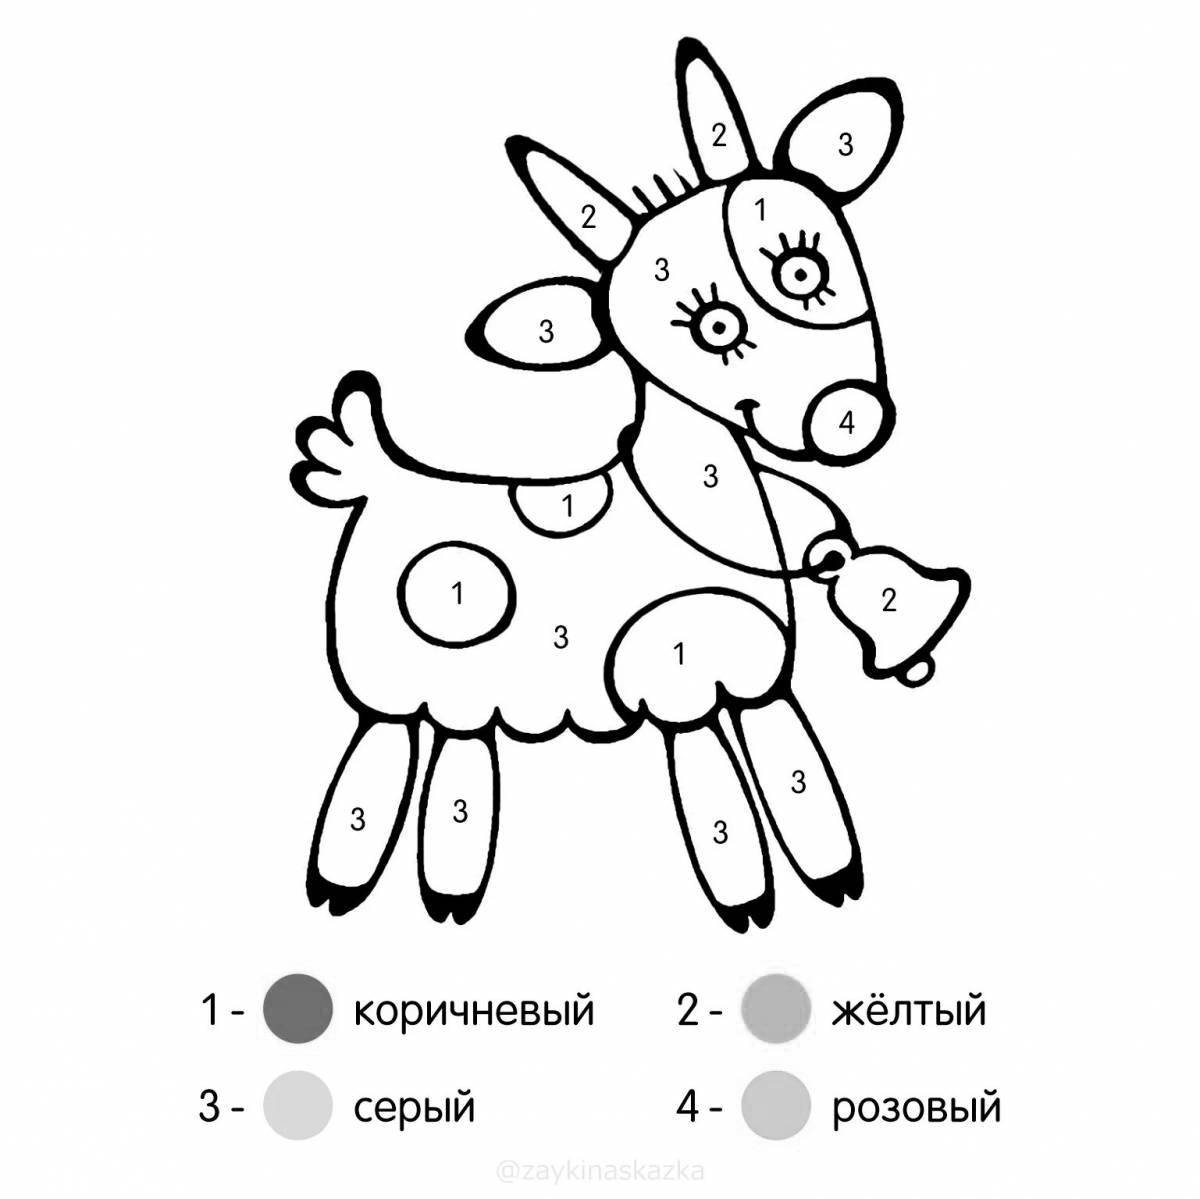 Creative coloring by number for 3-4 year olds